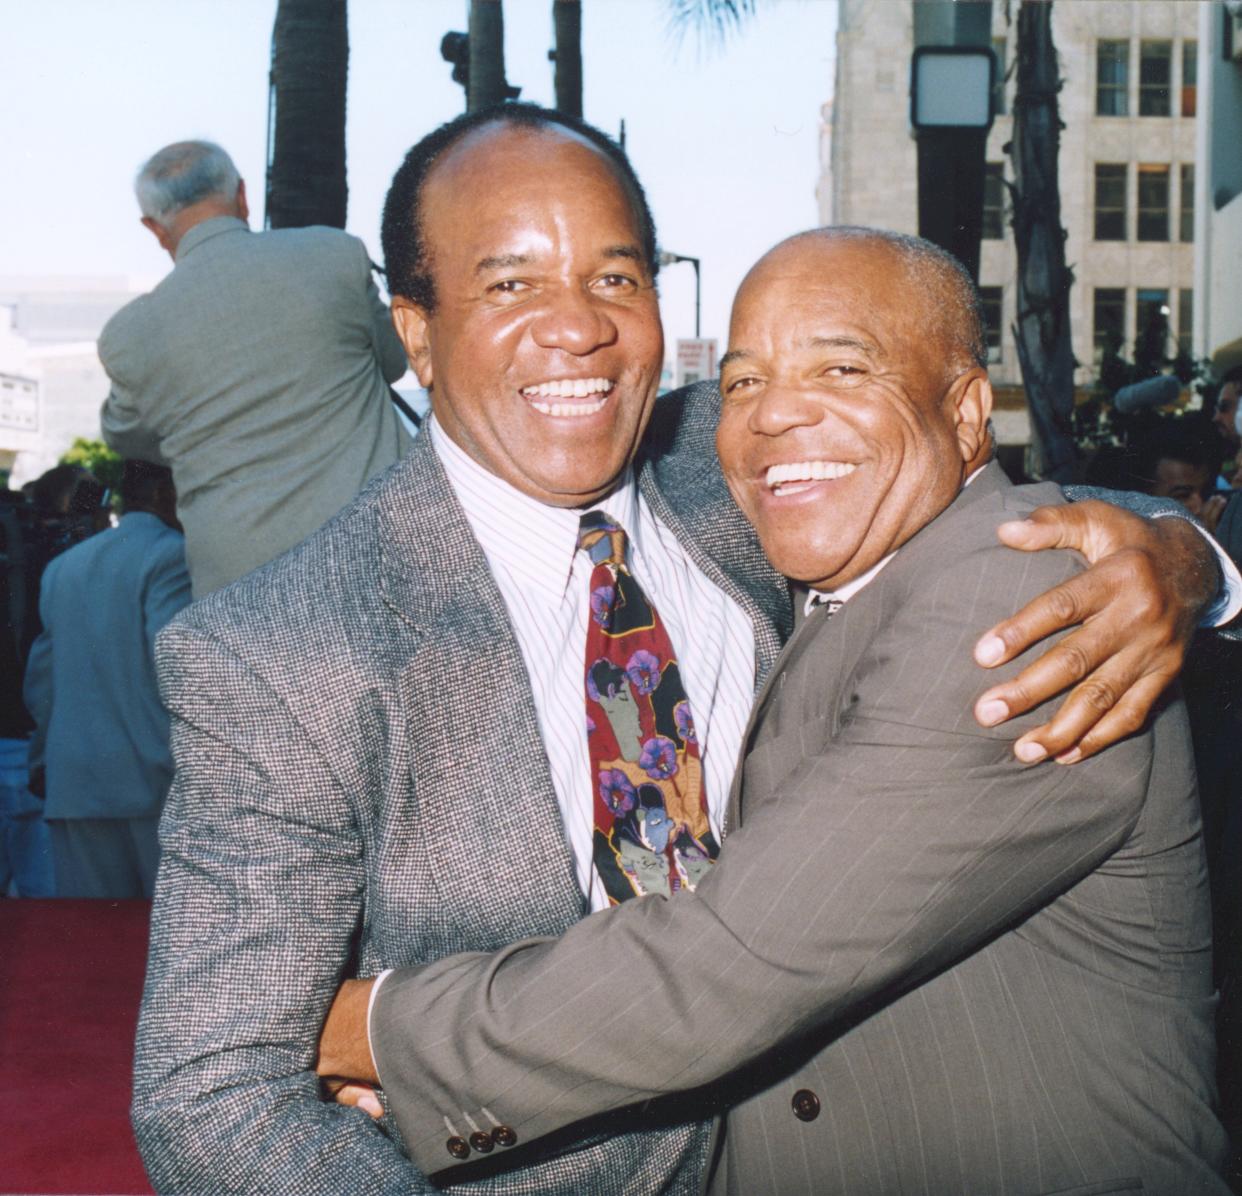 Robert Gordy Sr. (left) smiles in a photo with older brother and Motown founder Berry Gordy in a photo provided by Universal Music Enterprises. Gordy died Friday, Oct. 21 from natural causes in his Marina del Rey, California, home at the age of 91.